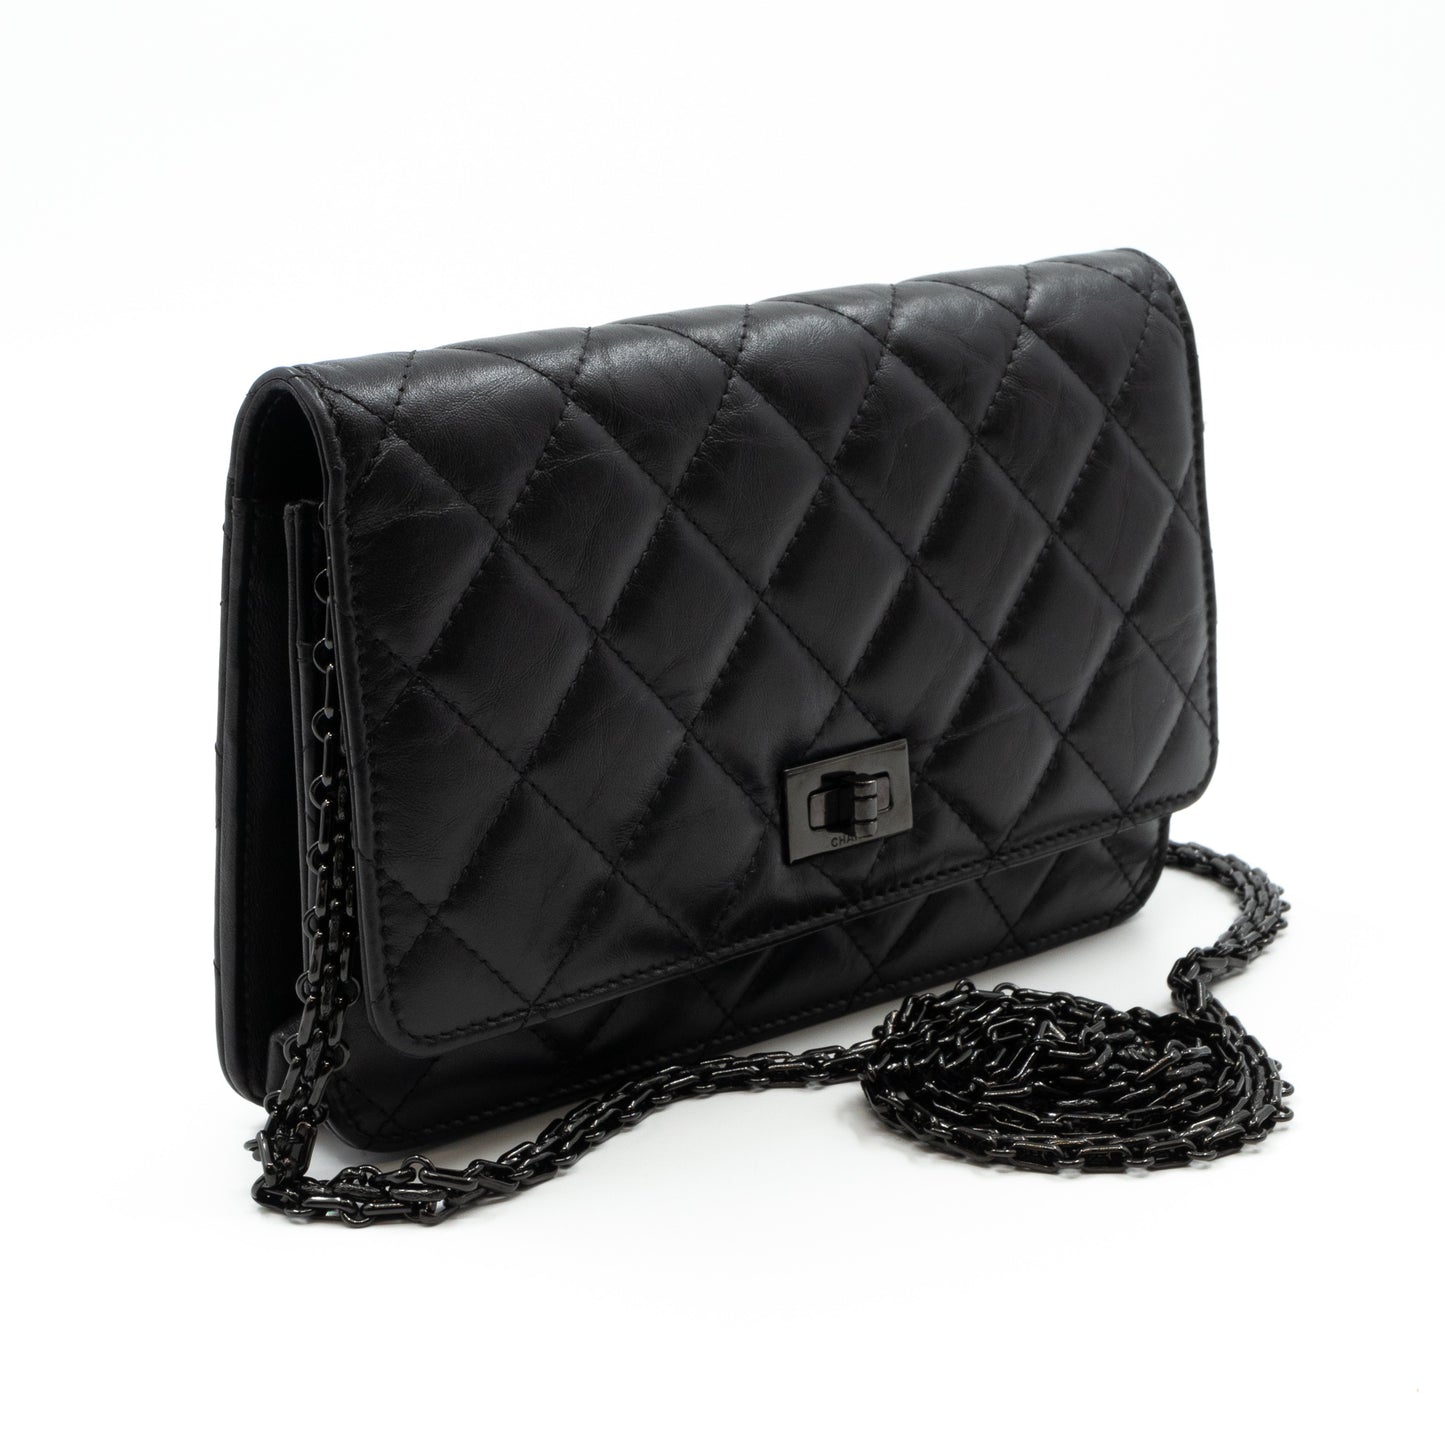 Chanel – Chanel Wallet On Chain 2.55 So Black Reissue WOC – Queen